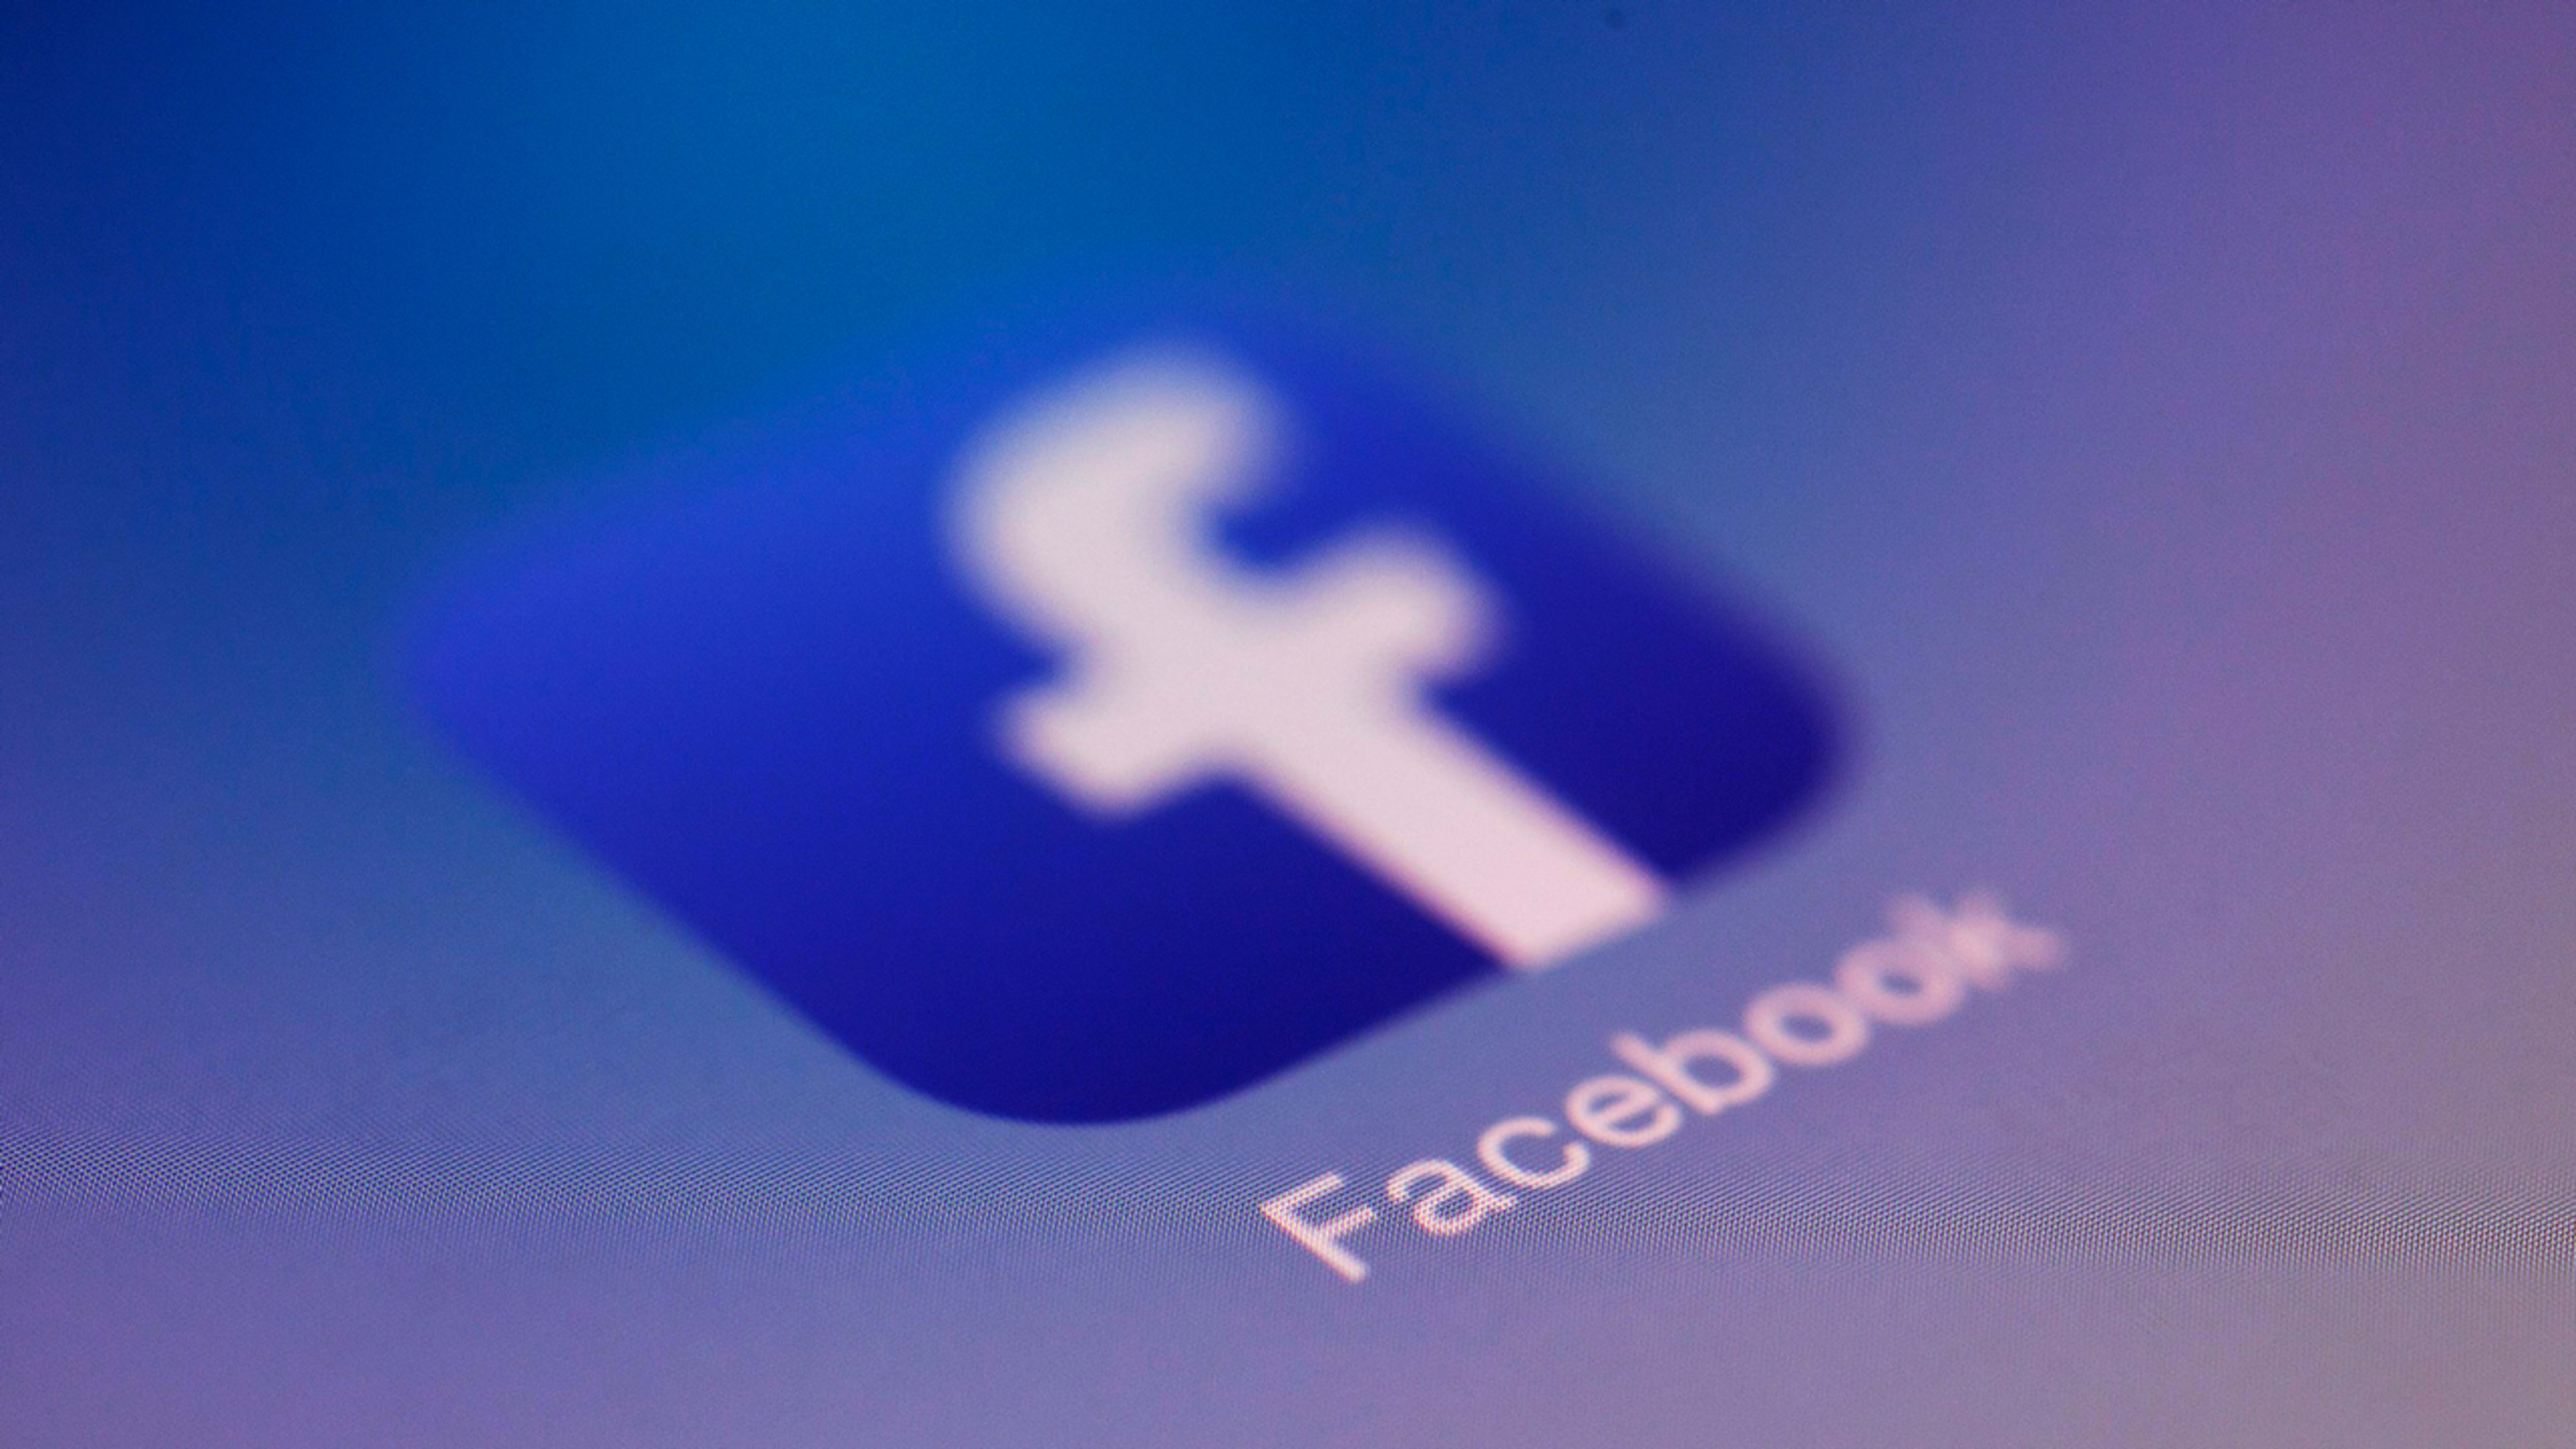 Analyst: Facebook is riddled with “systemic problems impacting the company”